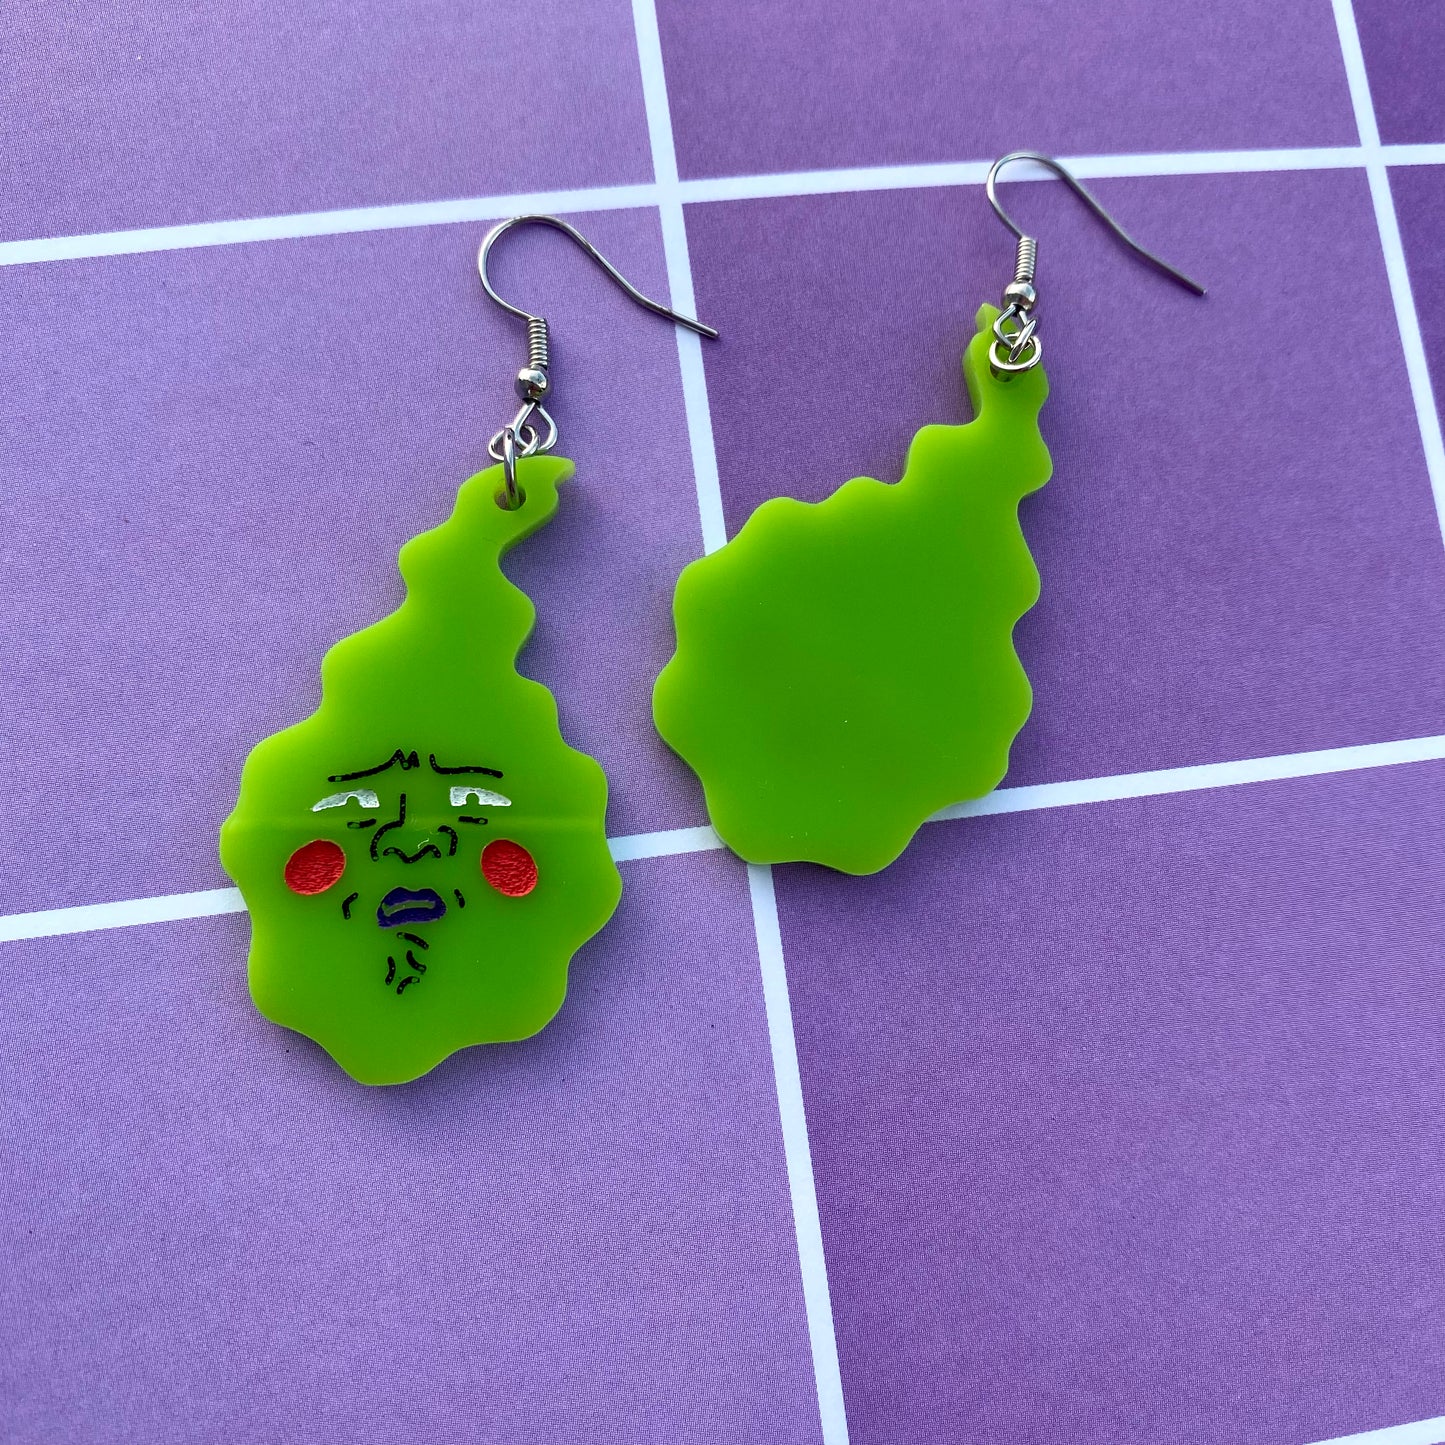 Small Disgusted Dimple Acrylic Earrings